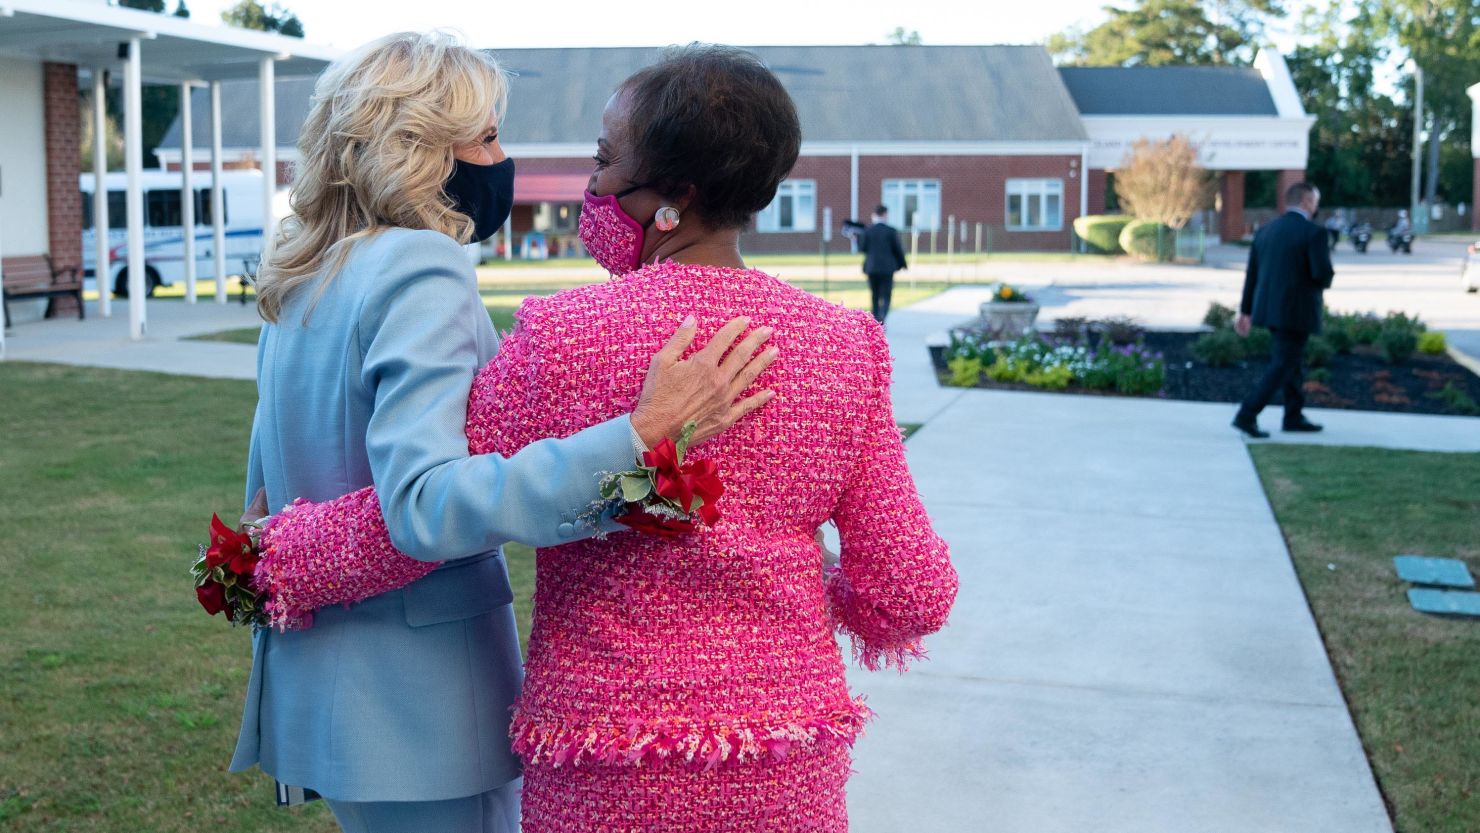 First Lady Jill Biden walks with Robin Jackson, her prayer partner, at a 50th anniversary celebration for the Rev. Charles B. Jackson at Brookland Baptist Church in Columbia, South Carolina, on Sunday. (Official White House Photo by Erin Scott)